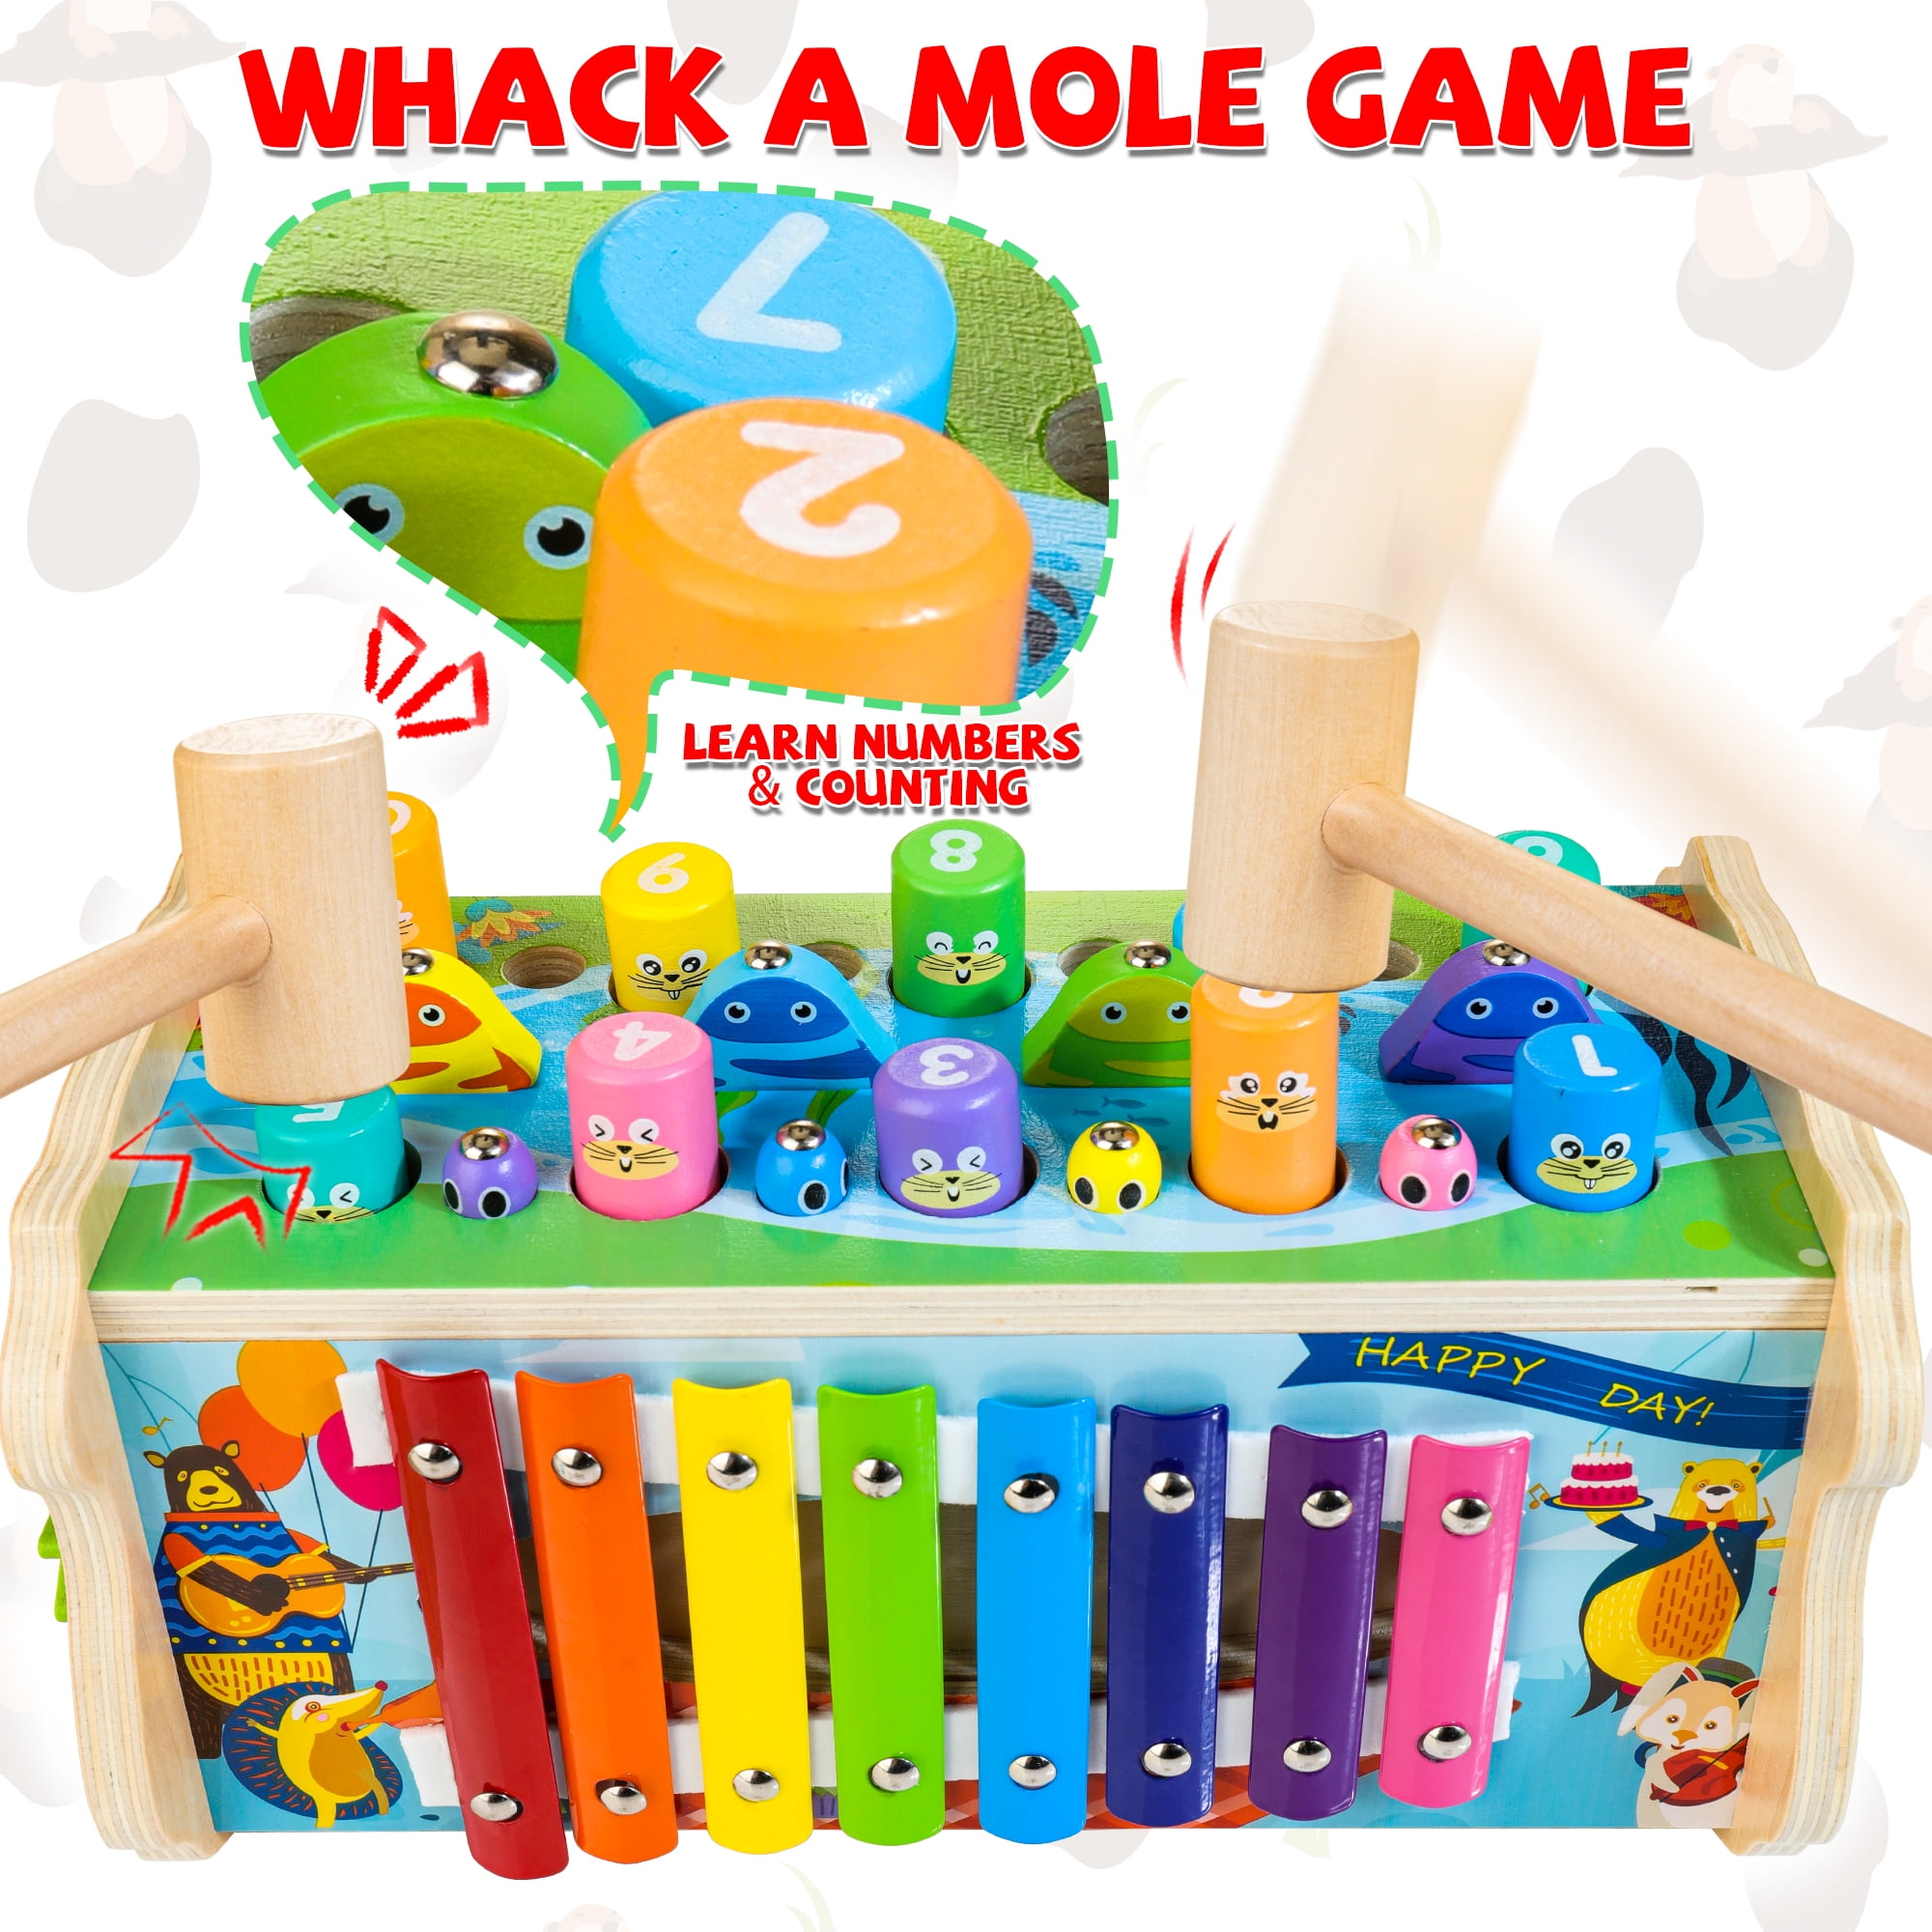 6 in 1 Wooden Montessori Toys for 1 Year Old Whack a Mole Game